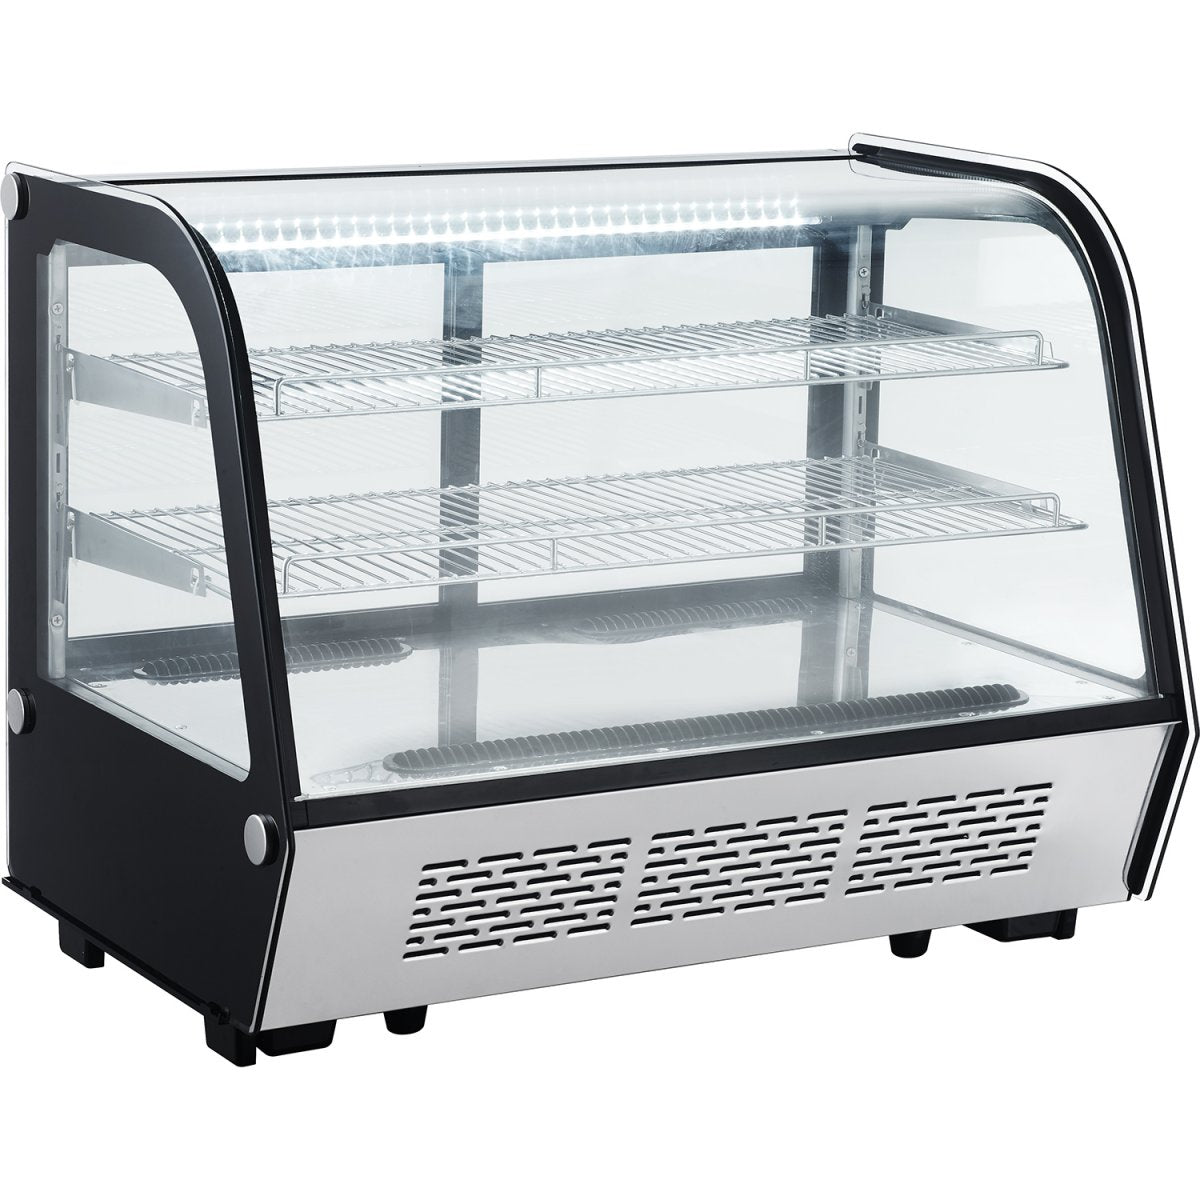 Heated Display Case 160 litres Countertop.Product ref:00245.🚚 5-7 Days Delivery